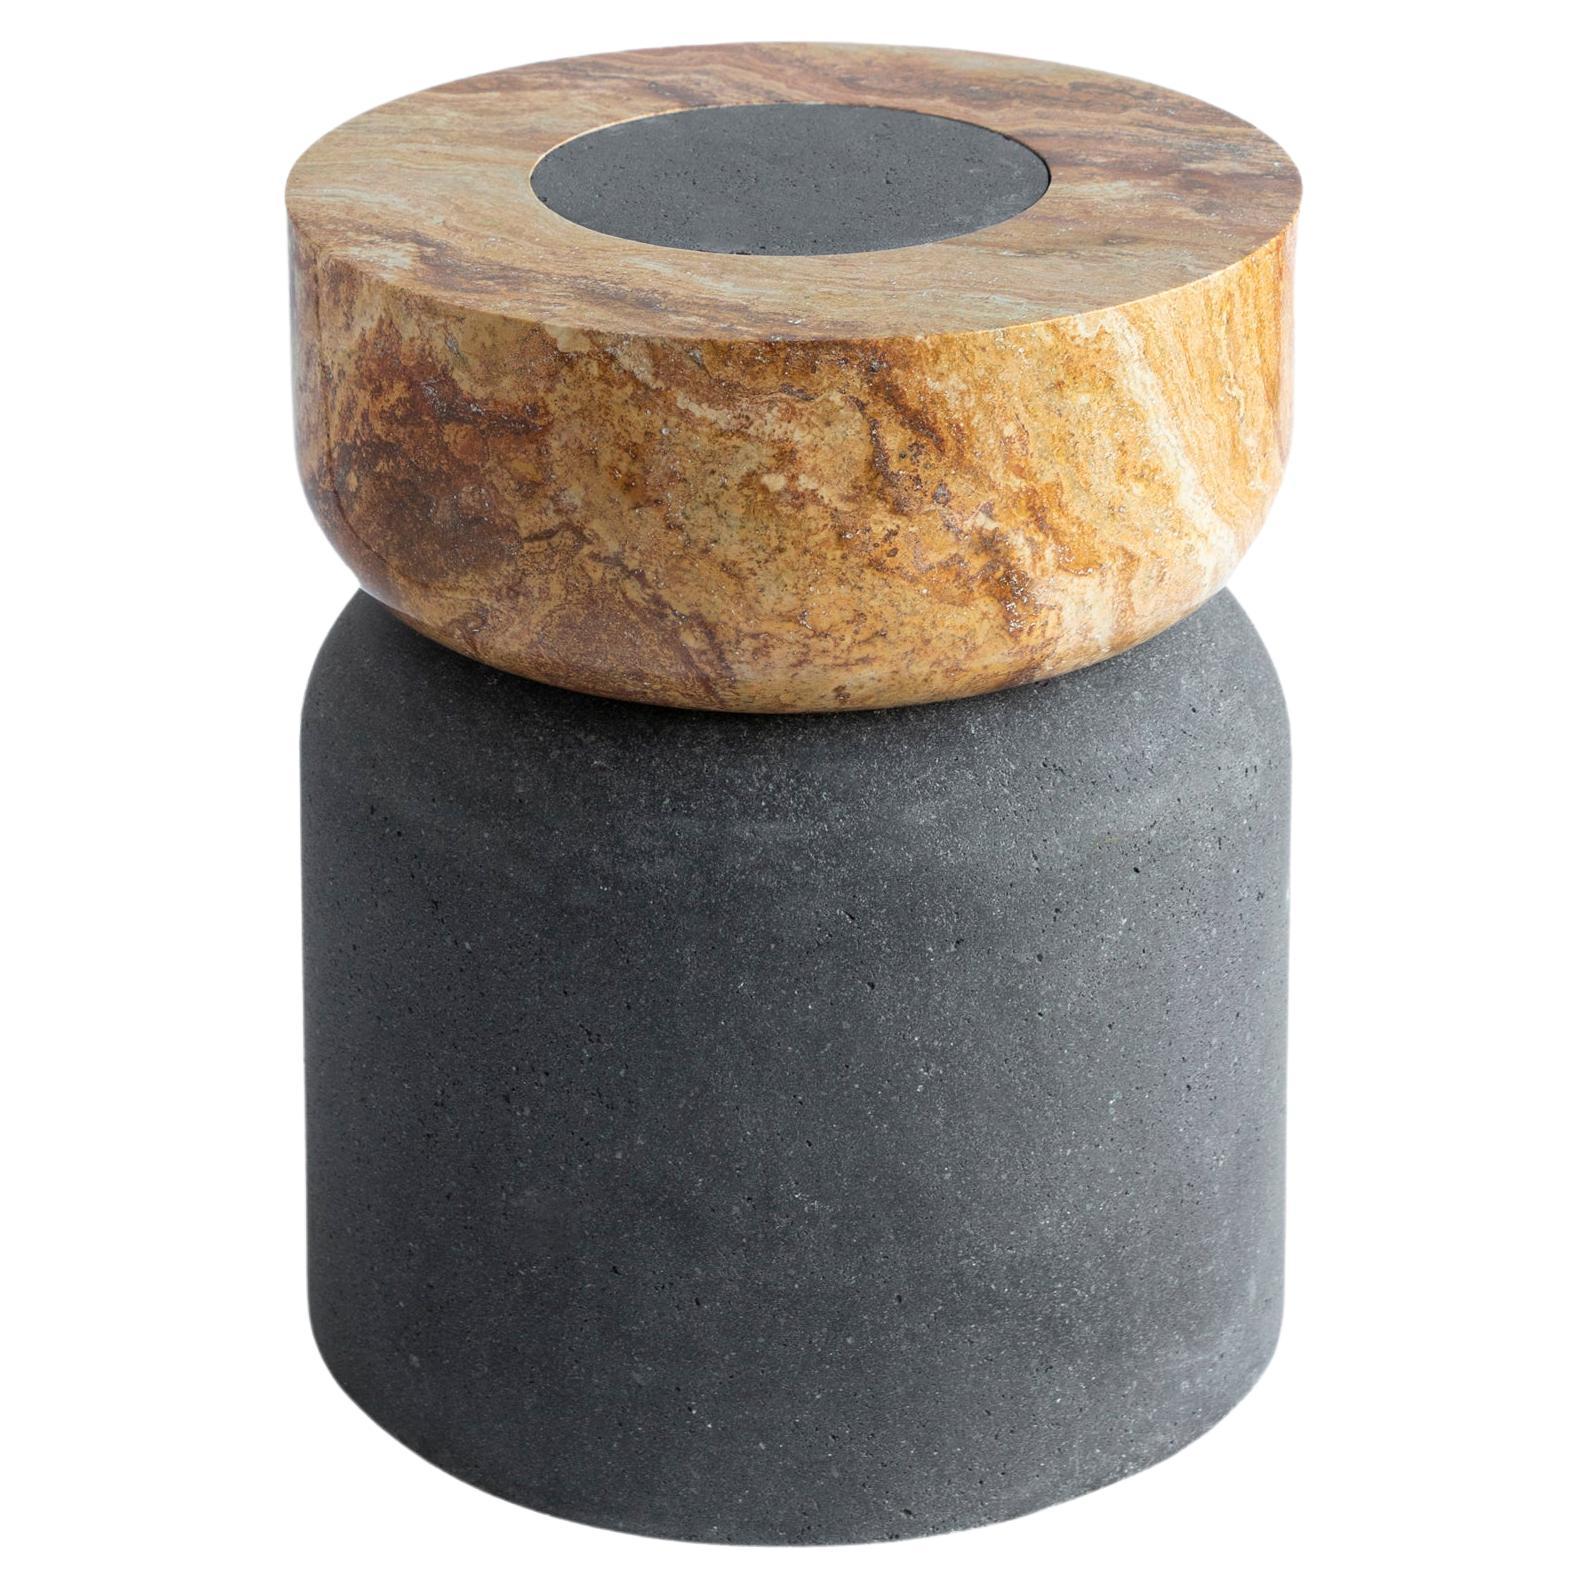 Volcanic Shade IV Stool/Table by Sten Studio, Represented by Tuleste Factory For Sale